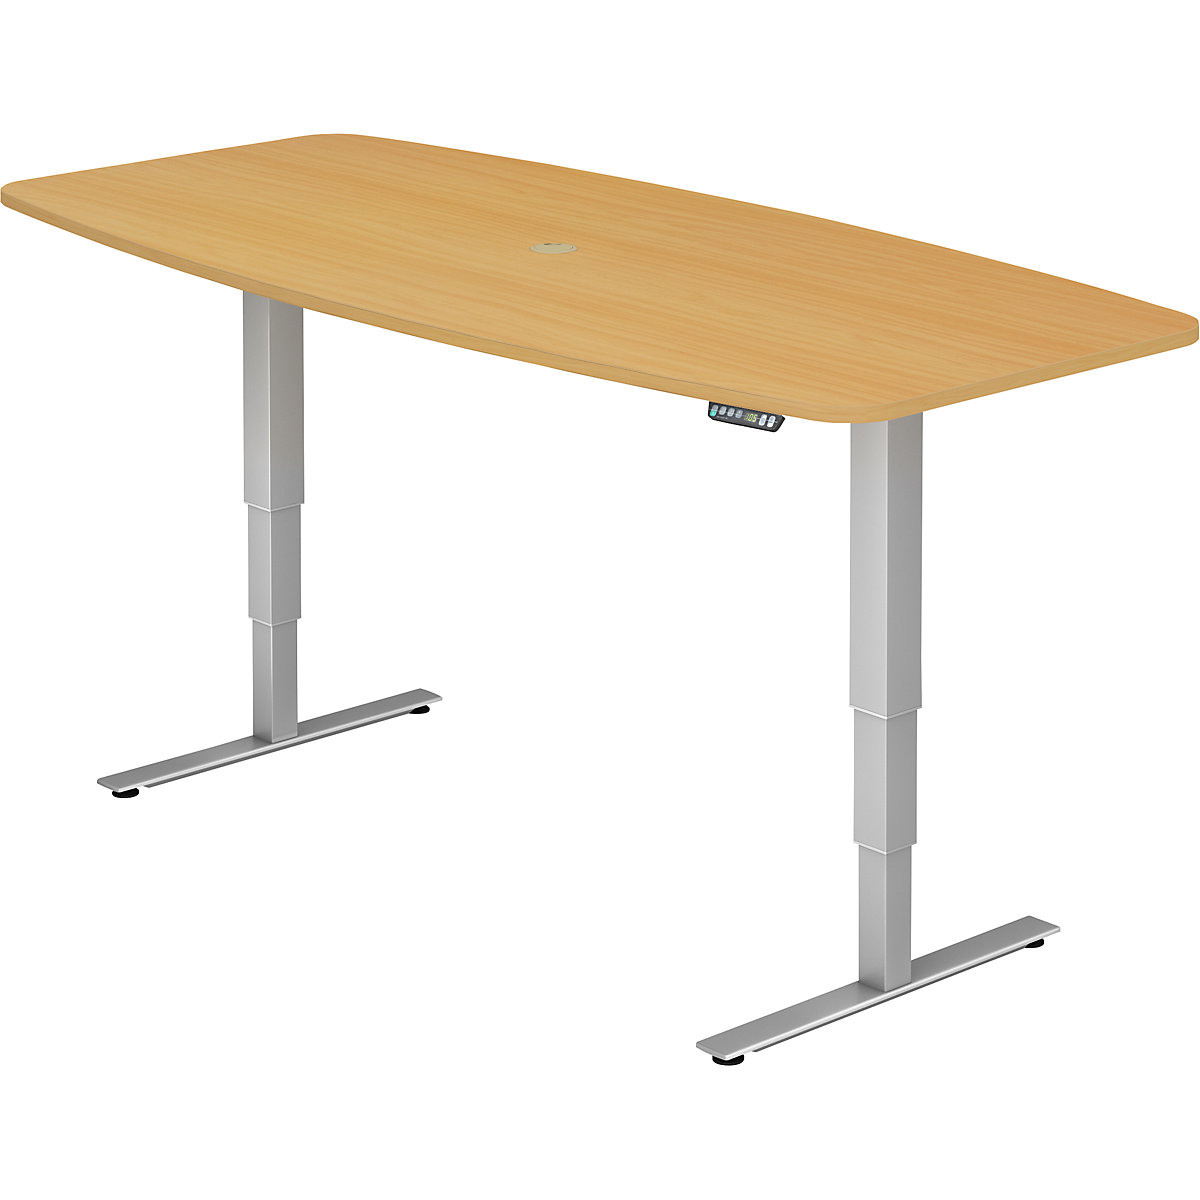 Conference table, WxD 2200 x 1030 mm, electric height adjustment from 620 – 1270 mm, beech finish-5